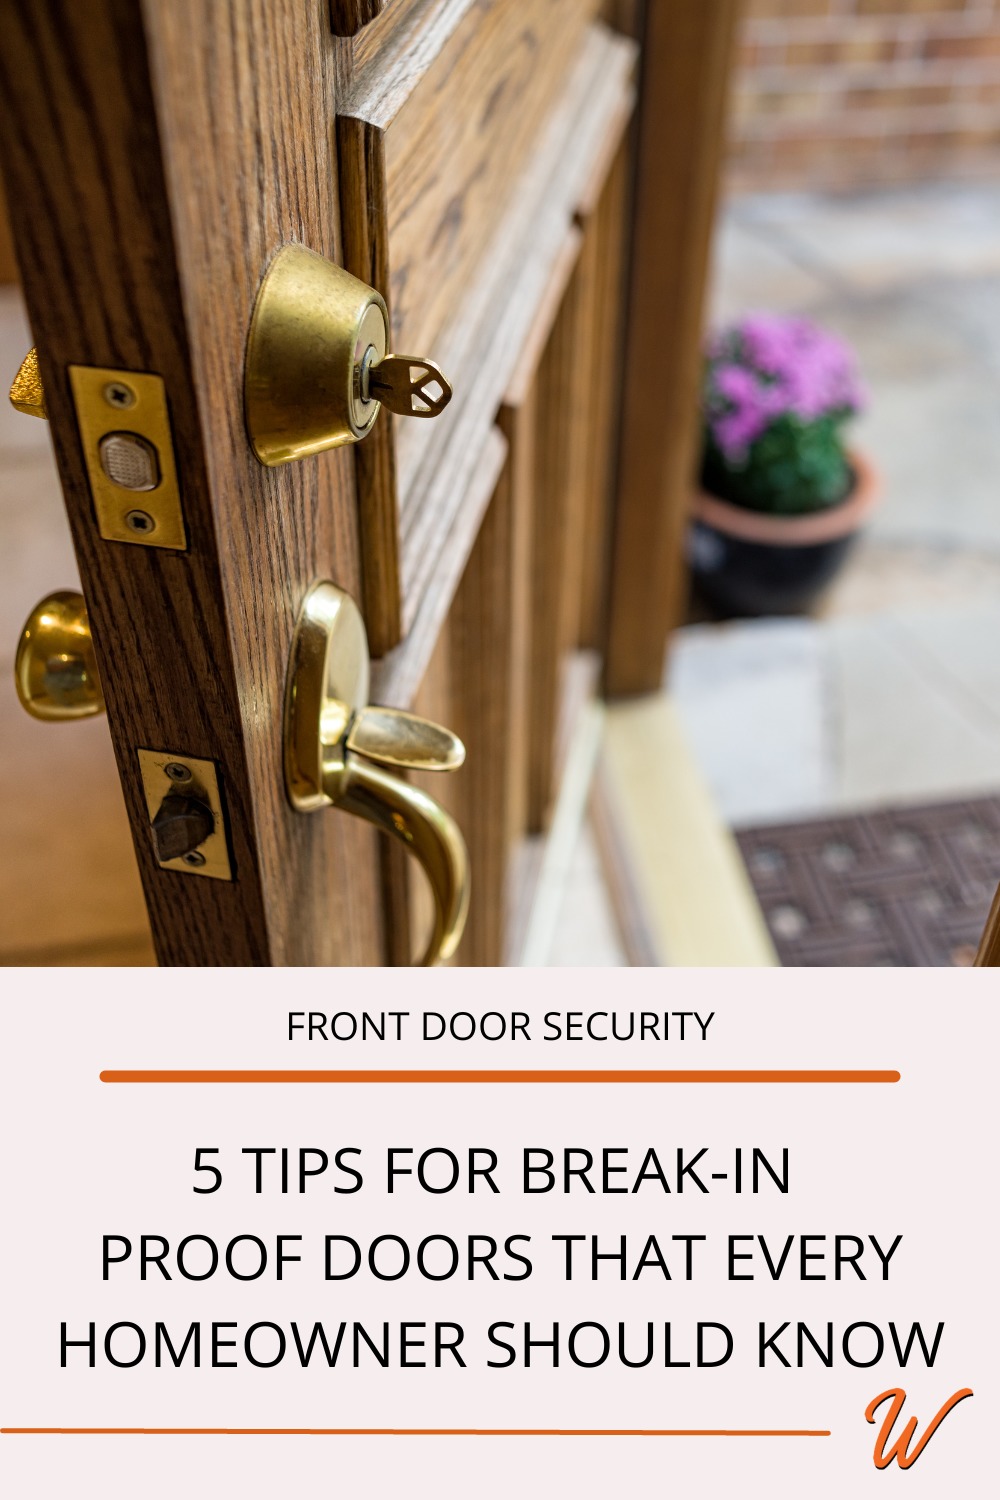 Close-up of an open wood front door with a key inserted in it captioned with: Front door security: 5 tips for break-in proof doors that everyone homeowner should know